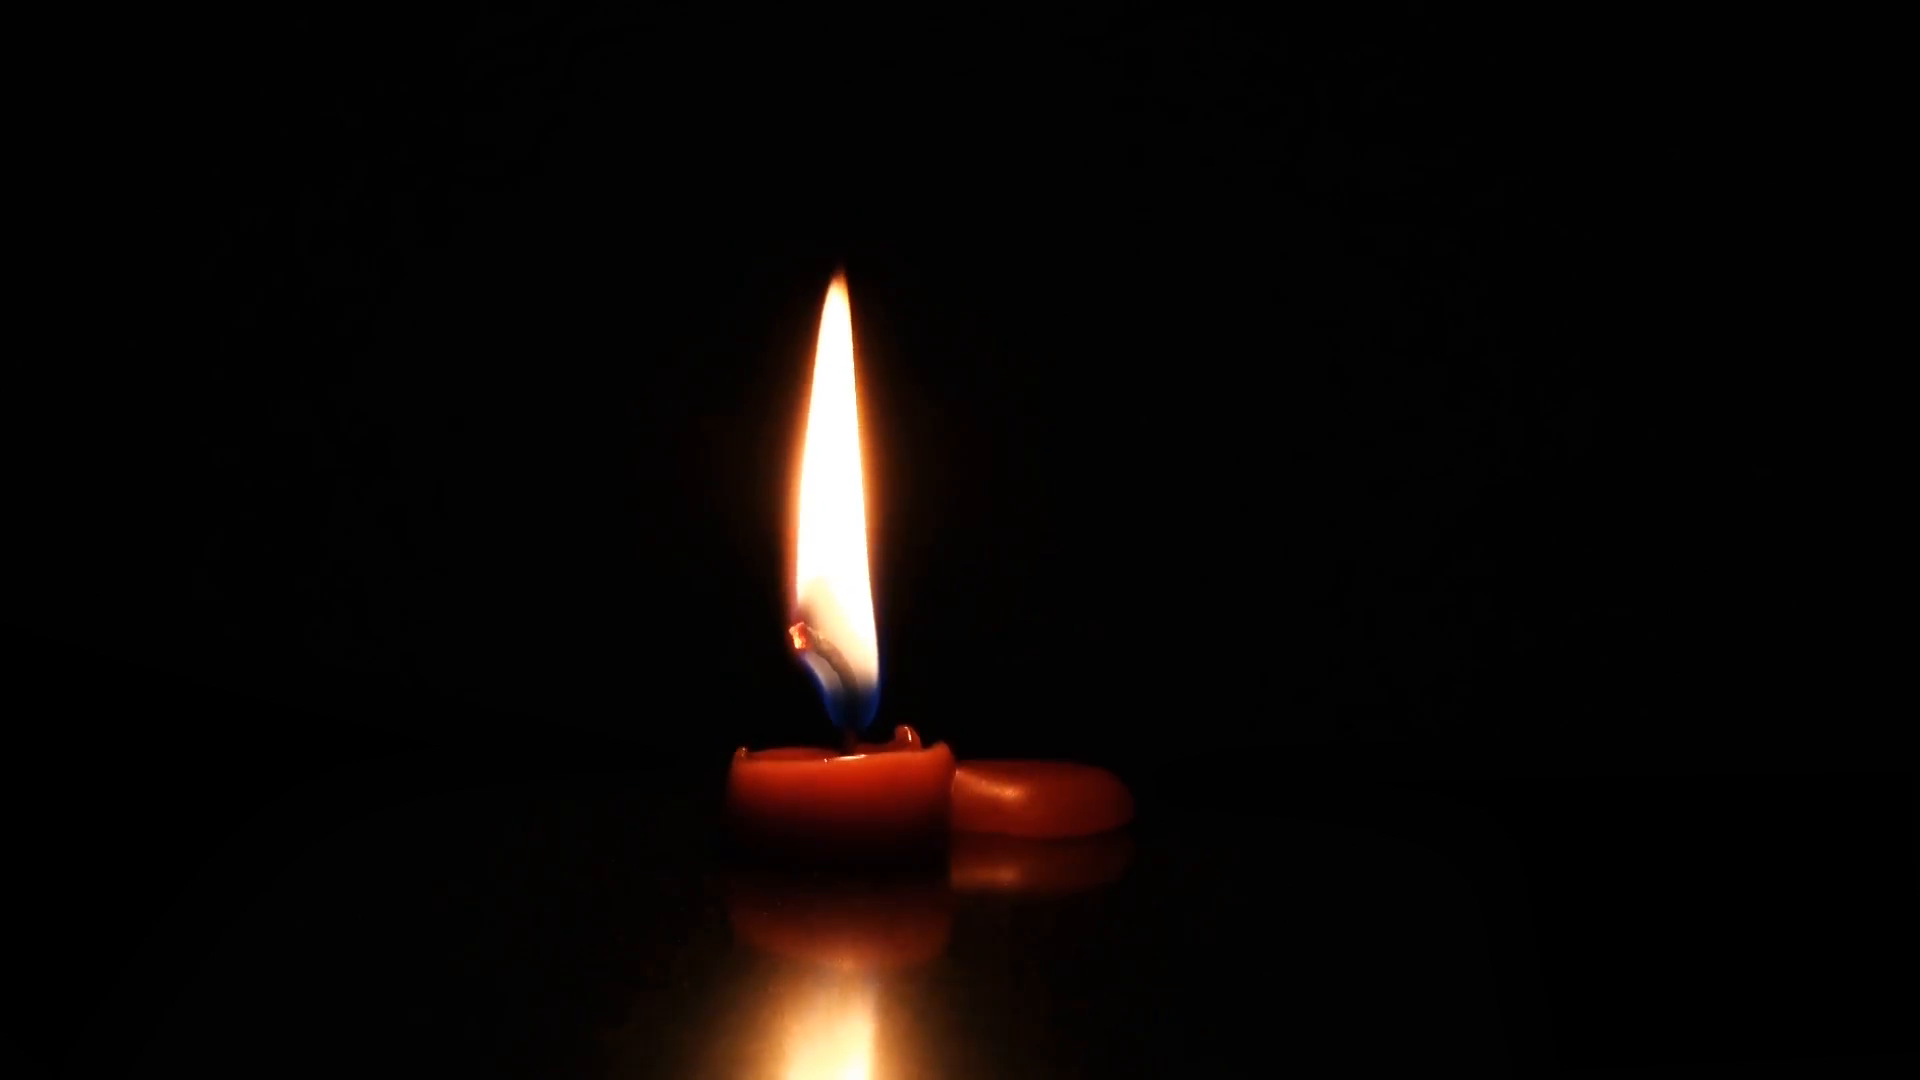 Candle burning down - time lapse Stock Video Footage - Videoblocks